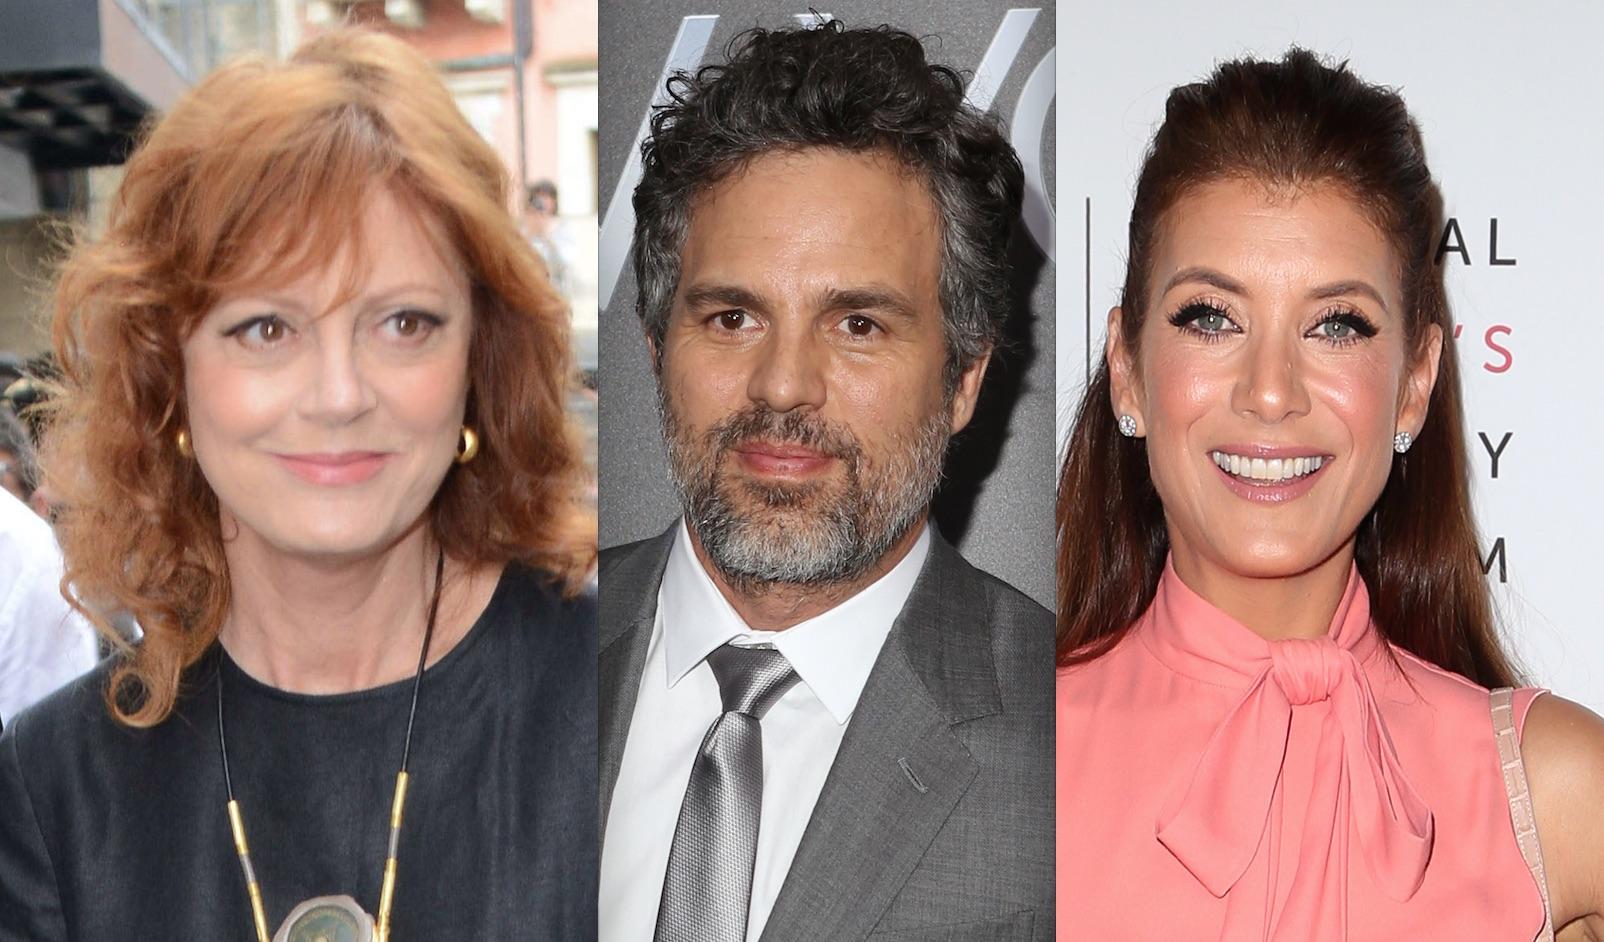 Susan Sarandon, Mark Ruffalo, Kate Walsh And Other Celebs React To Dakota Access Pipeline Decision:        This Is Everything!        